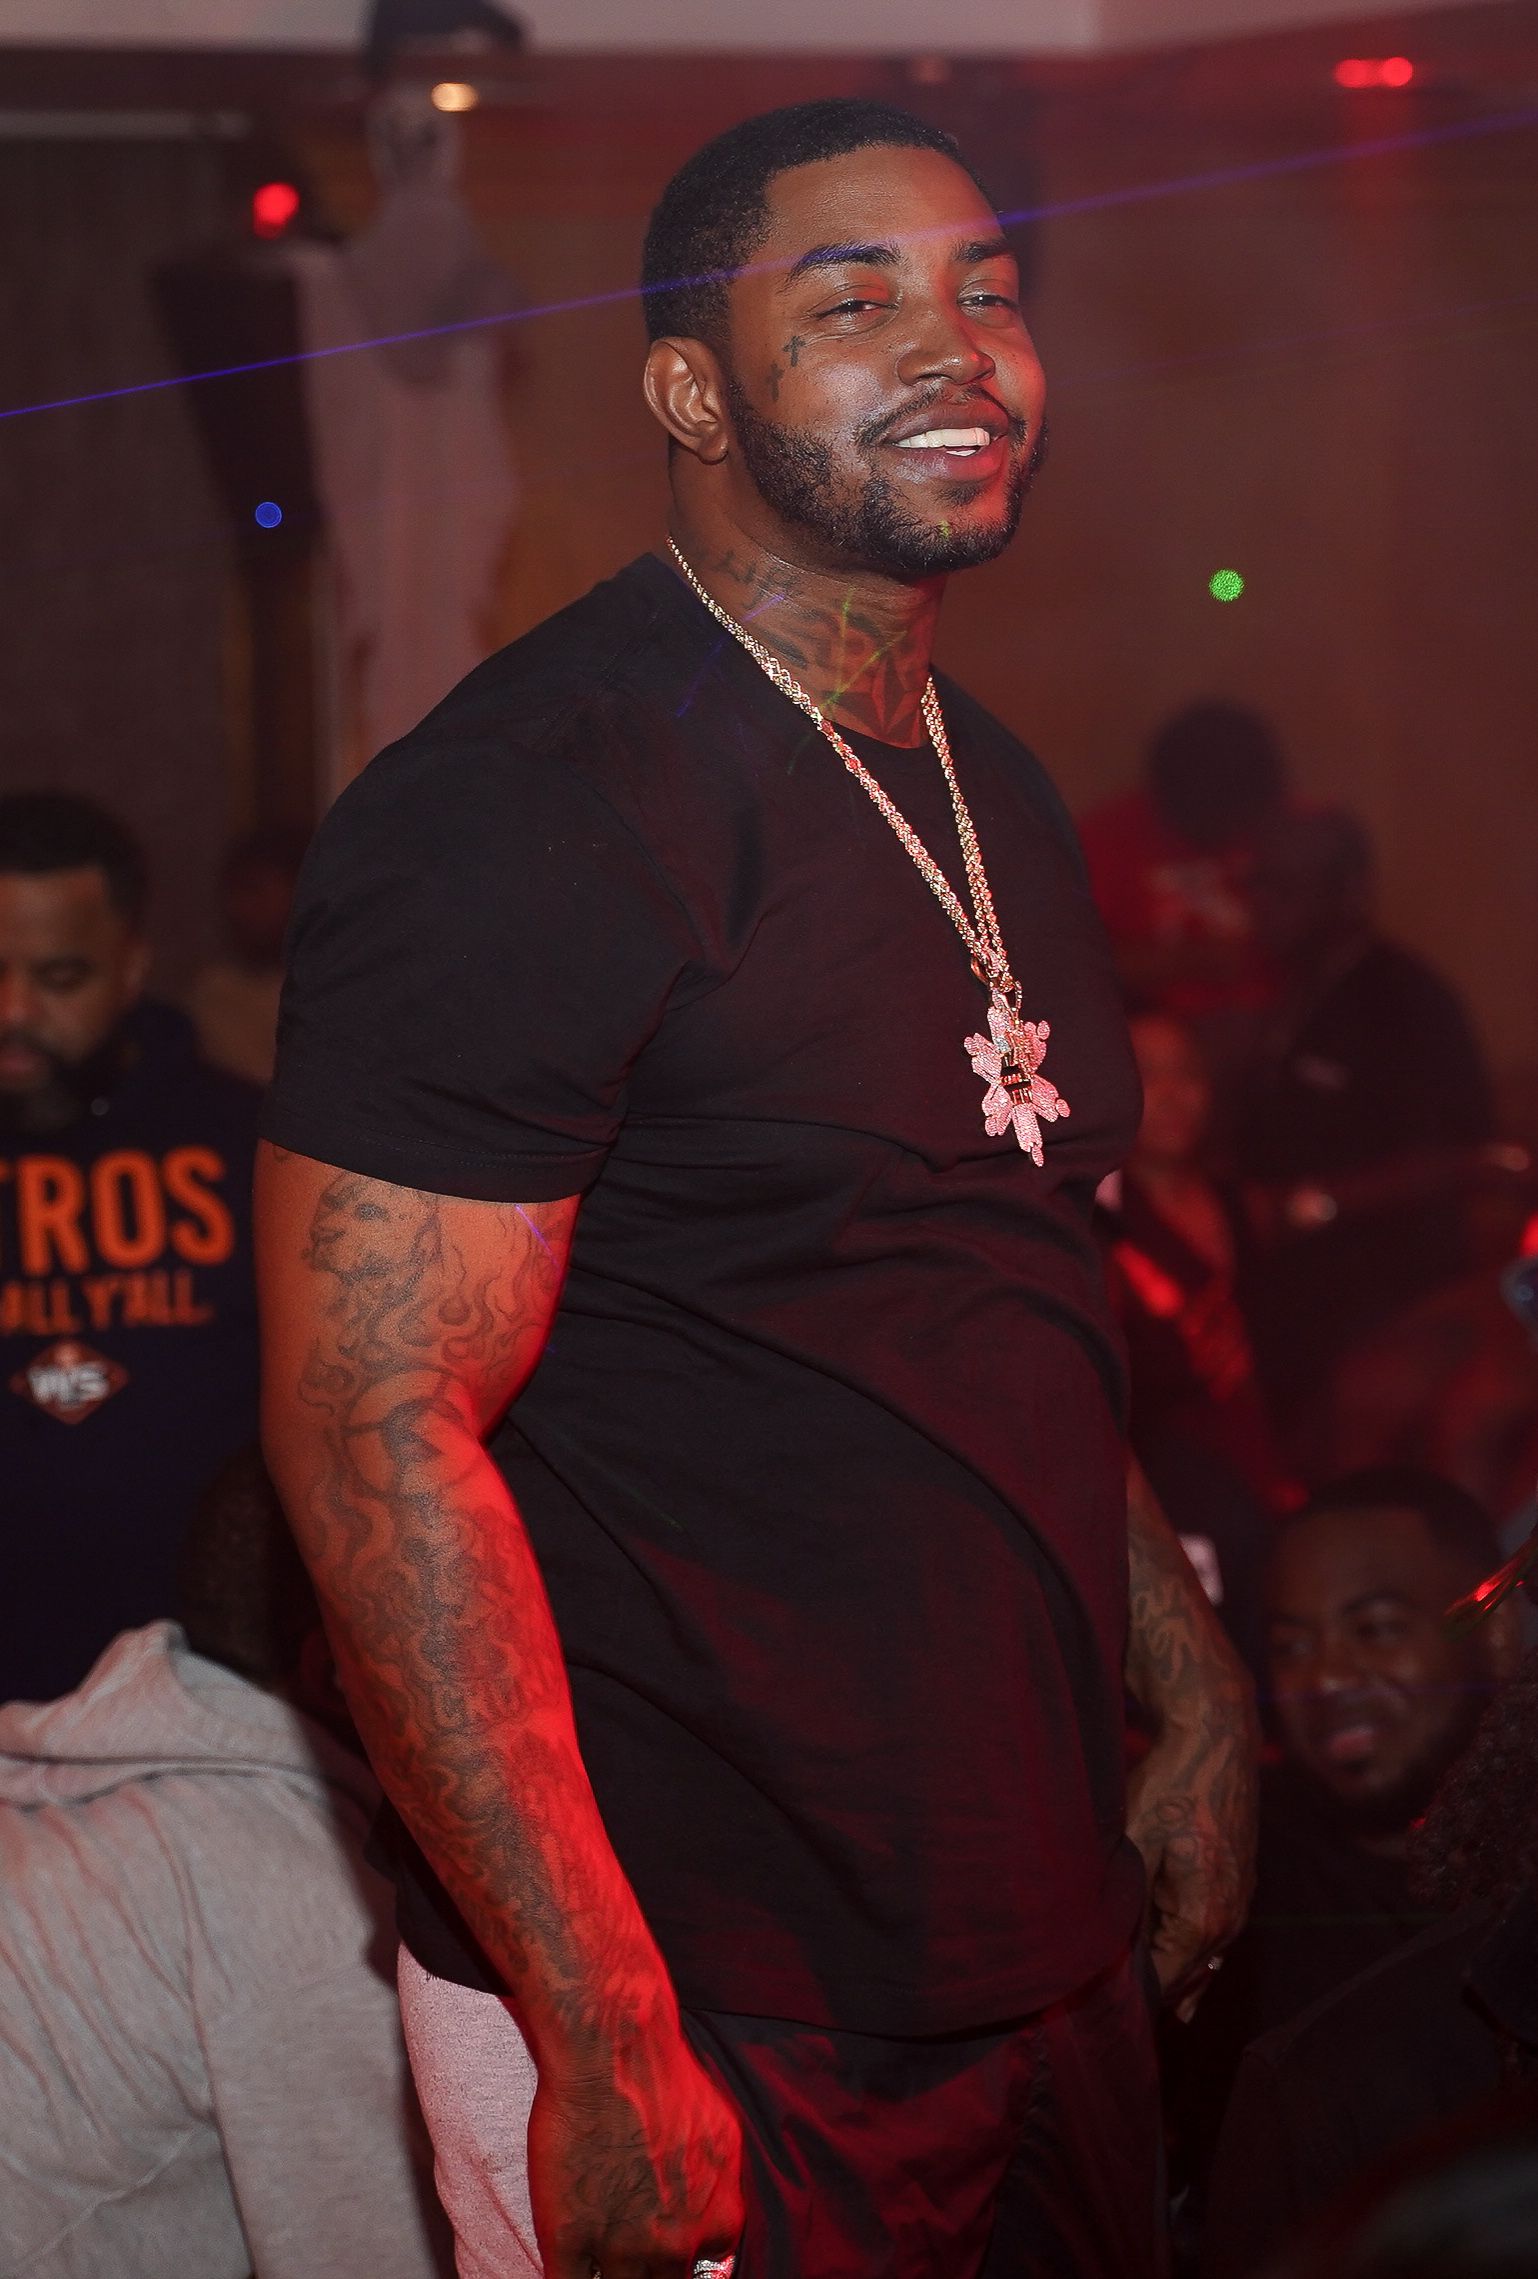 Lil Scrappy at a Halloween costume party on October 31, 2019 in Atlanta. | Photo: Getty Images